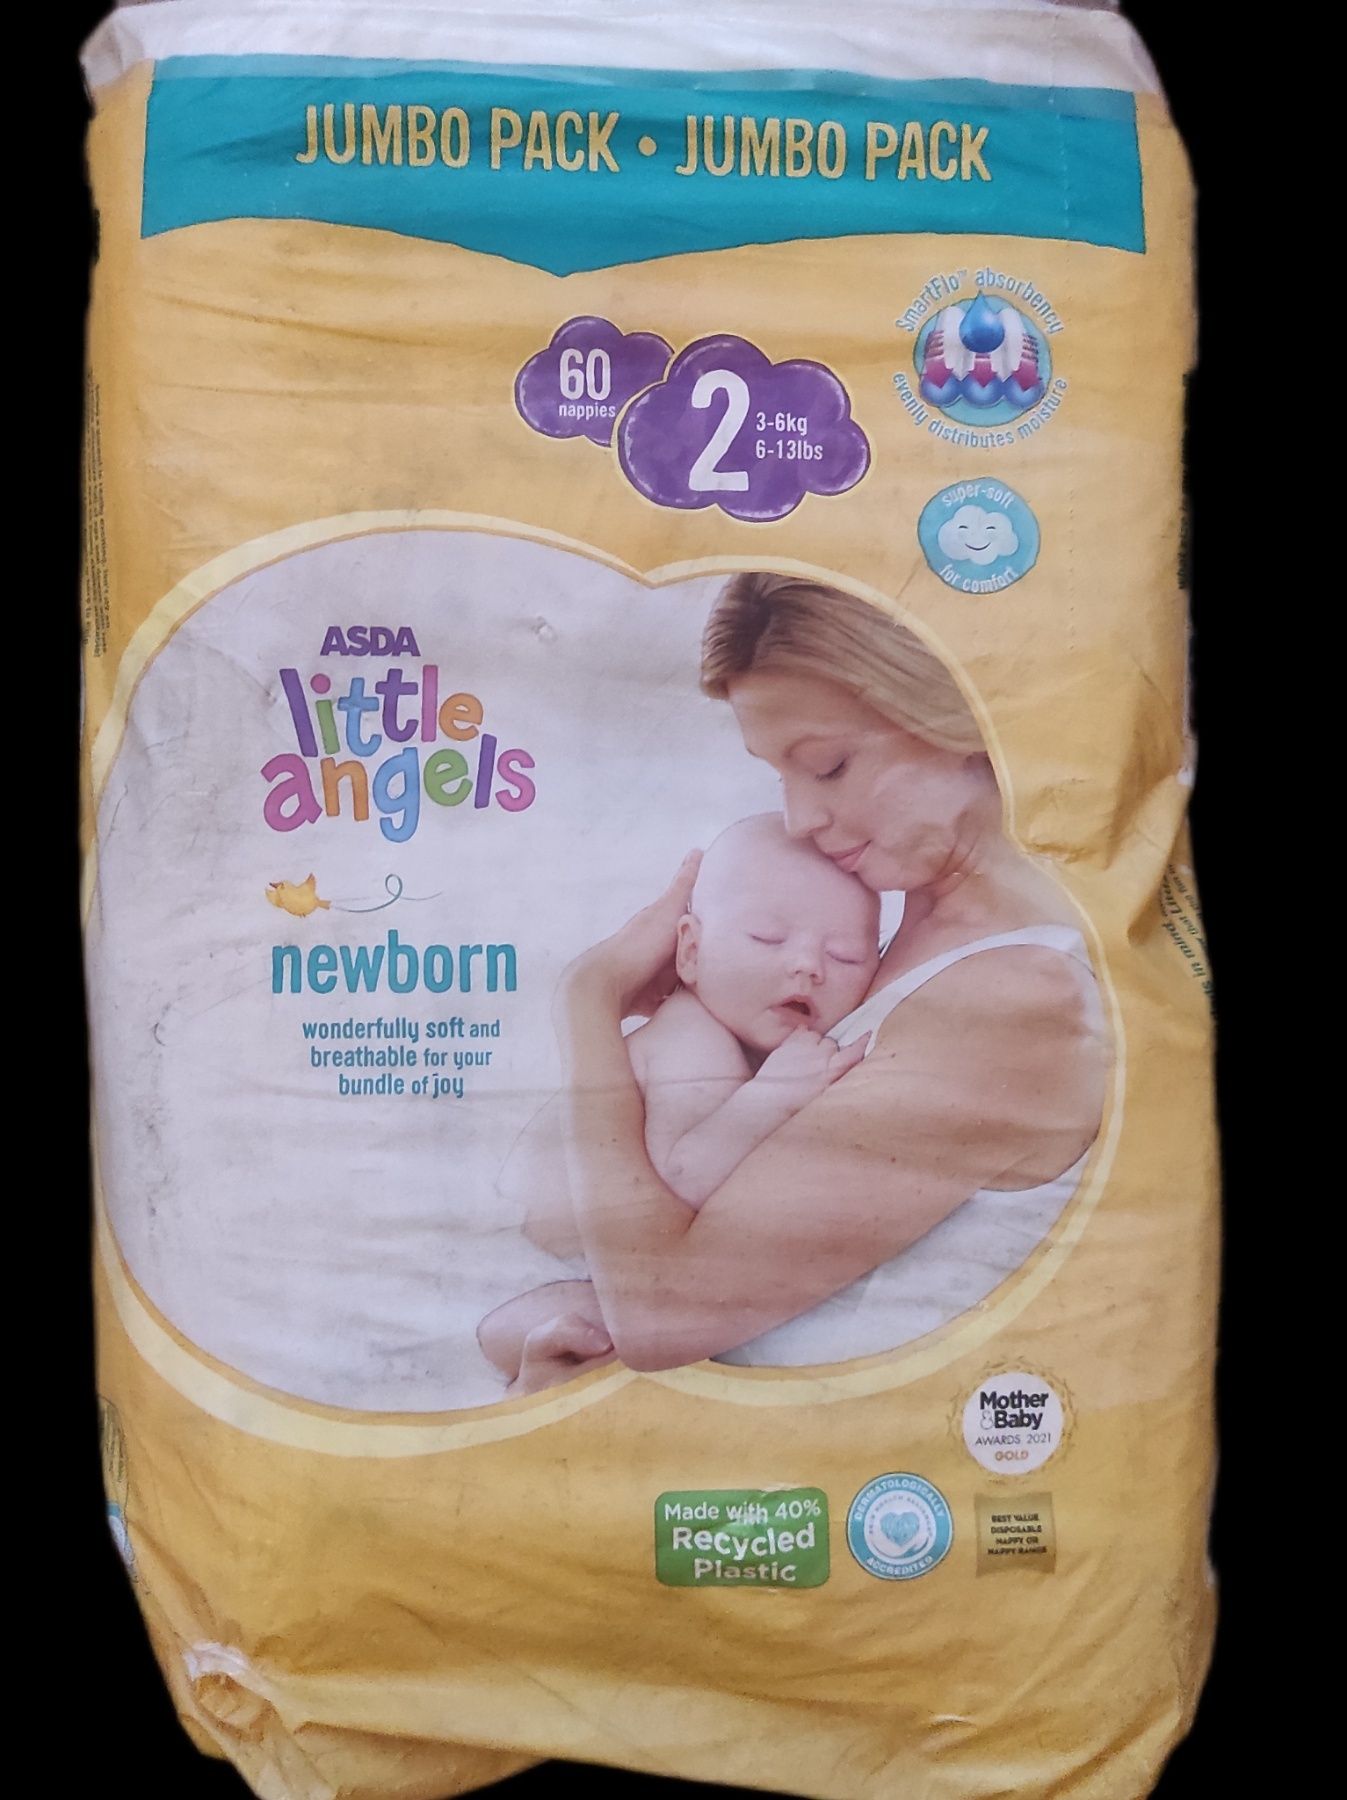 pampers epson xp-760